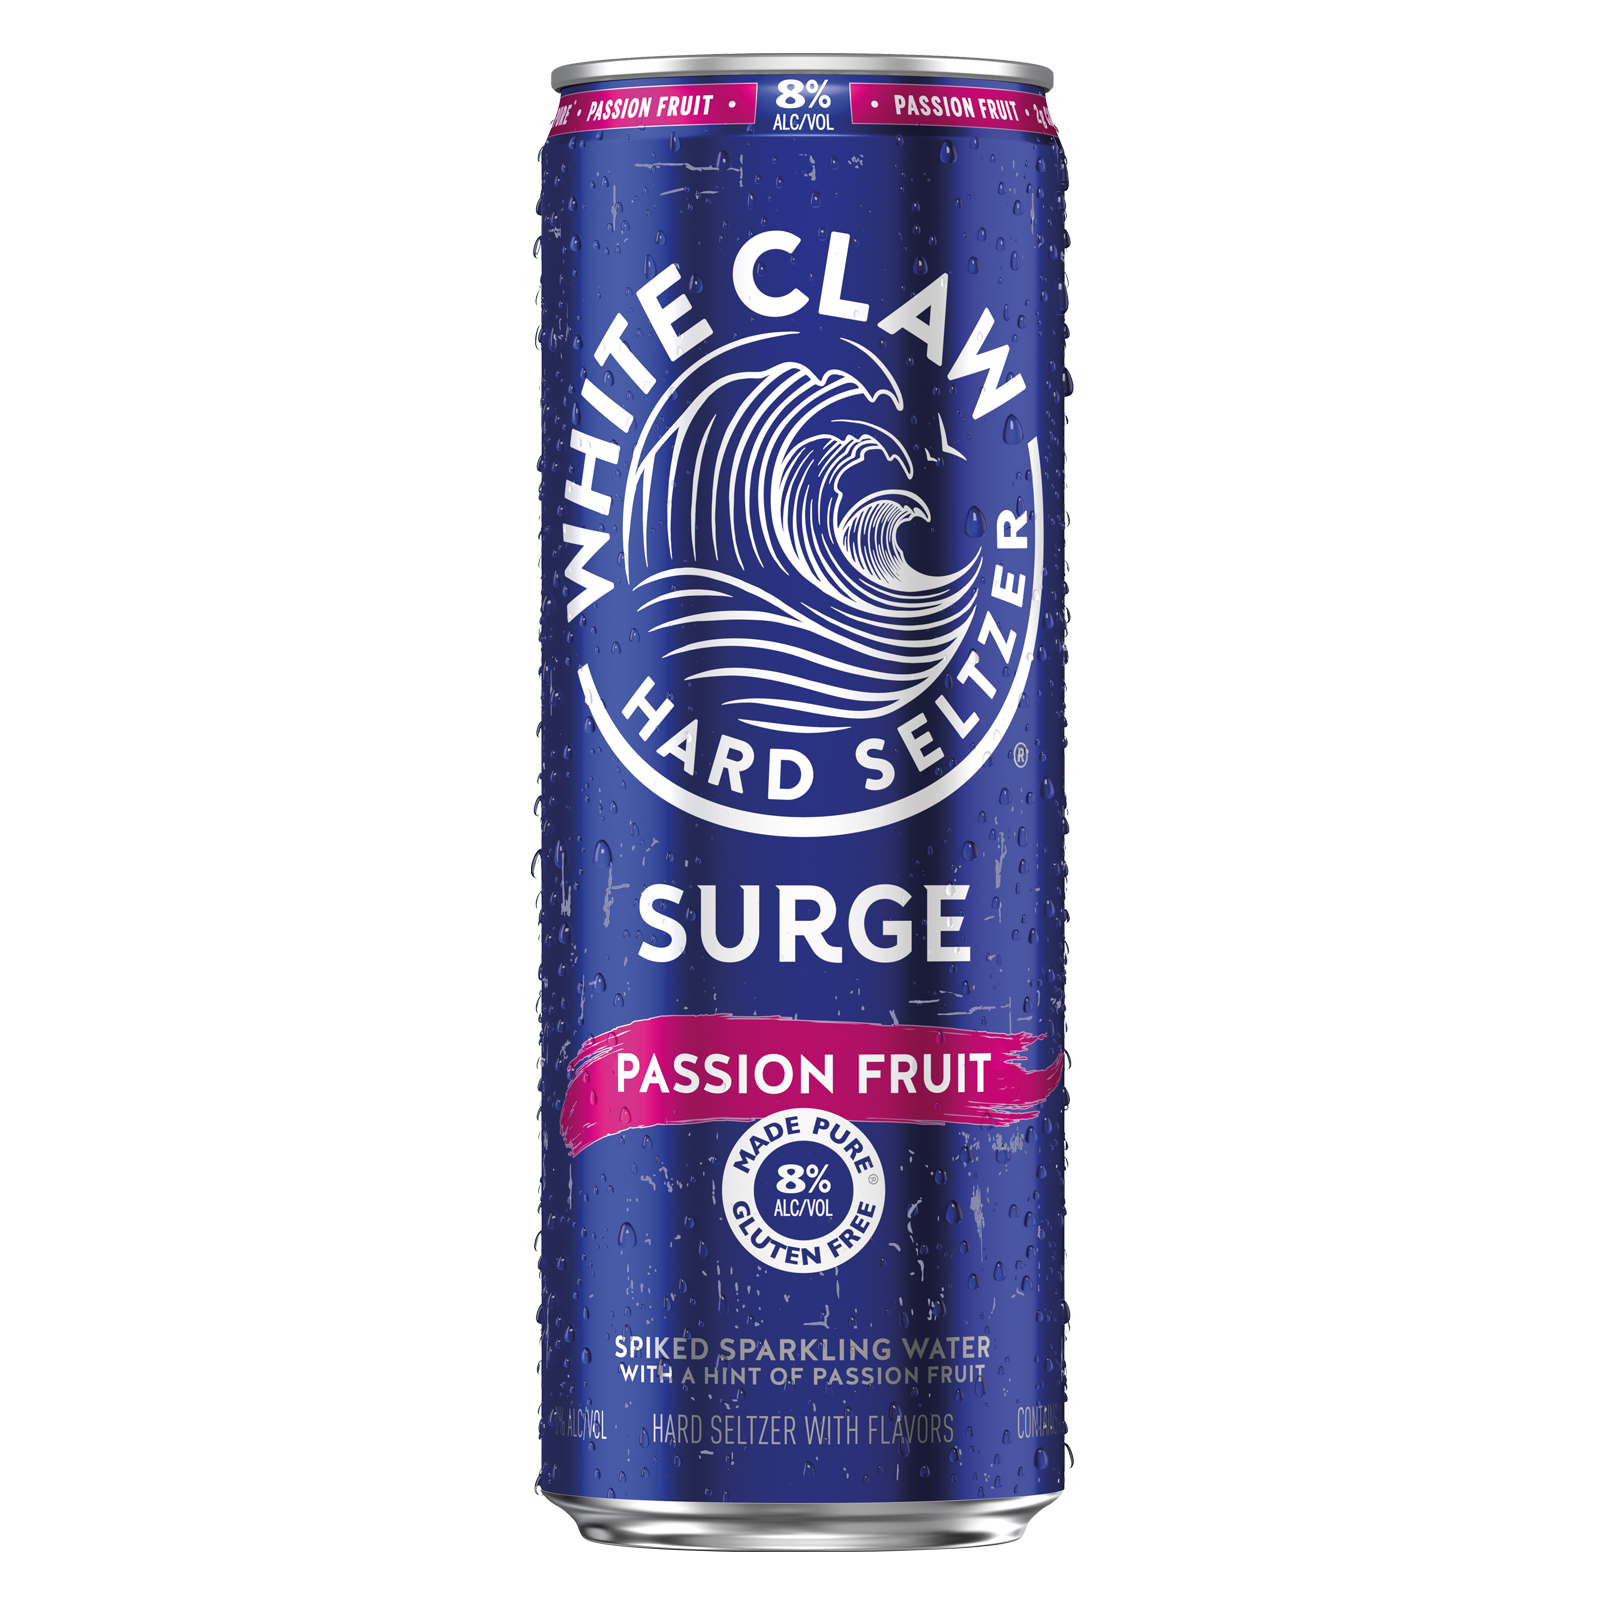 White Claw Surge #2 Passionfruit Single 12oz Can 8.0% ABV